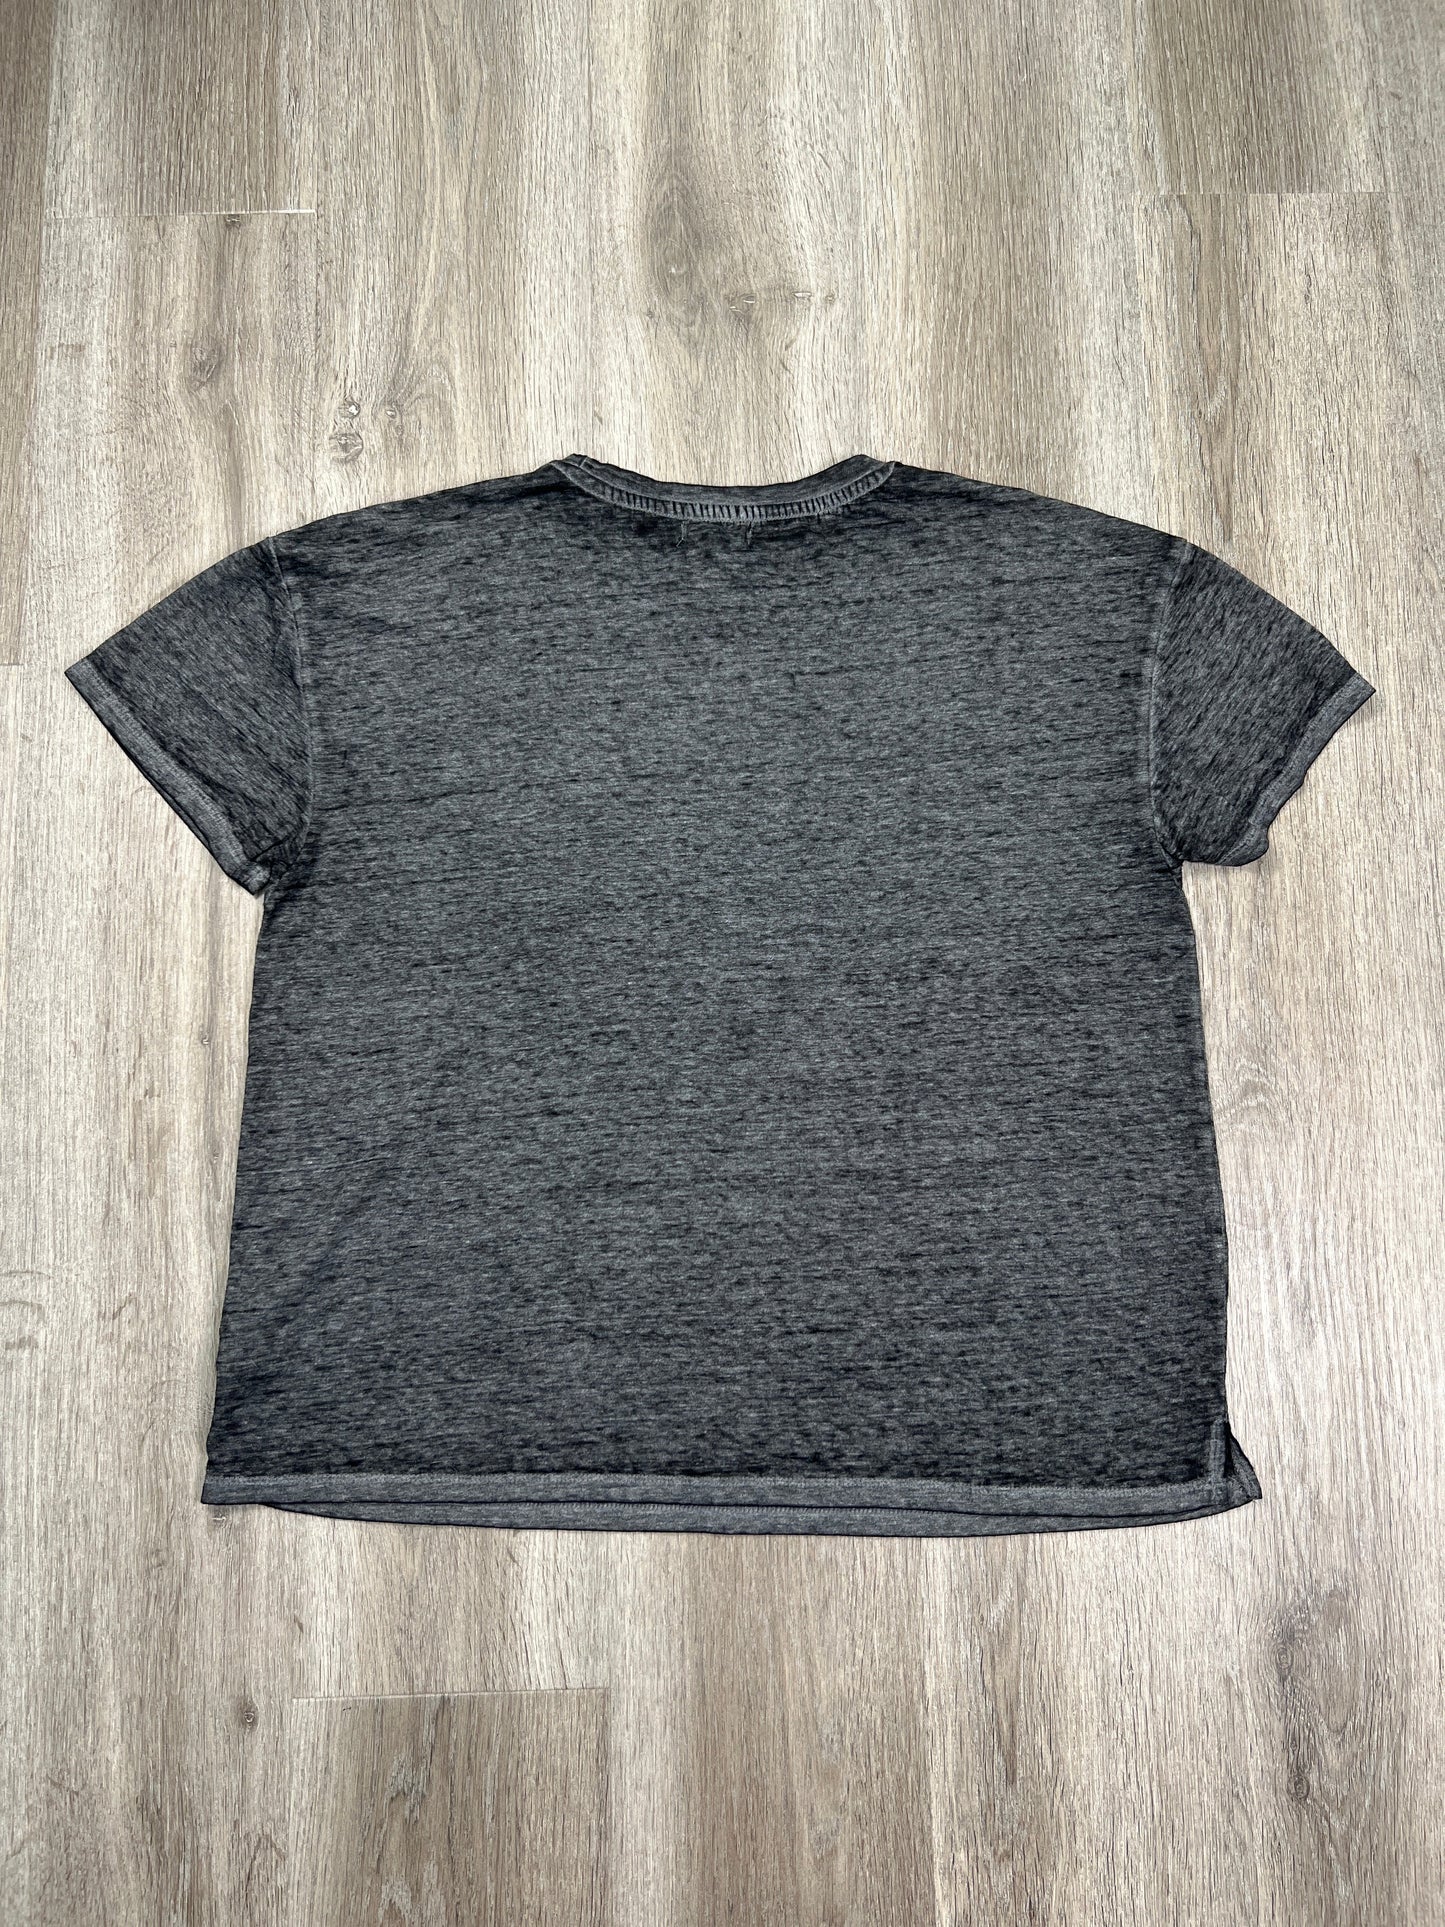 Grey Top Short Sleeve Maurices, Size L